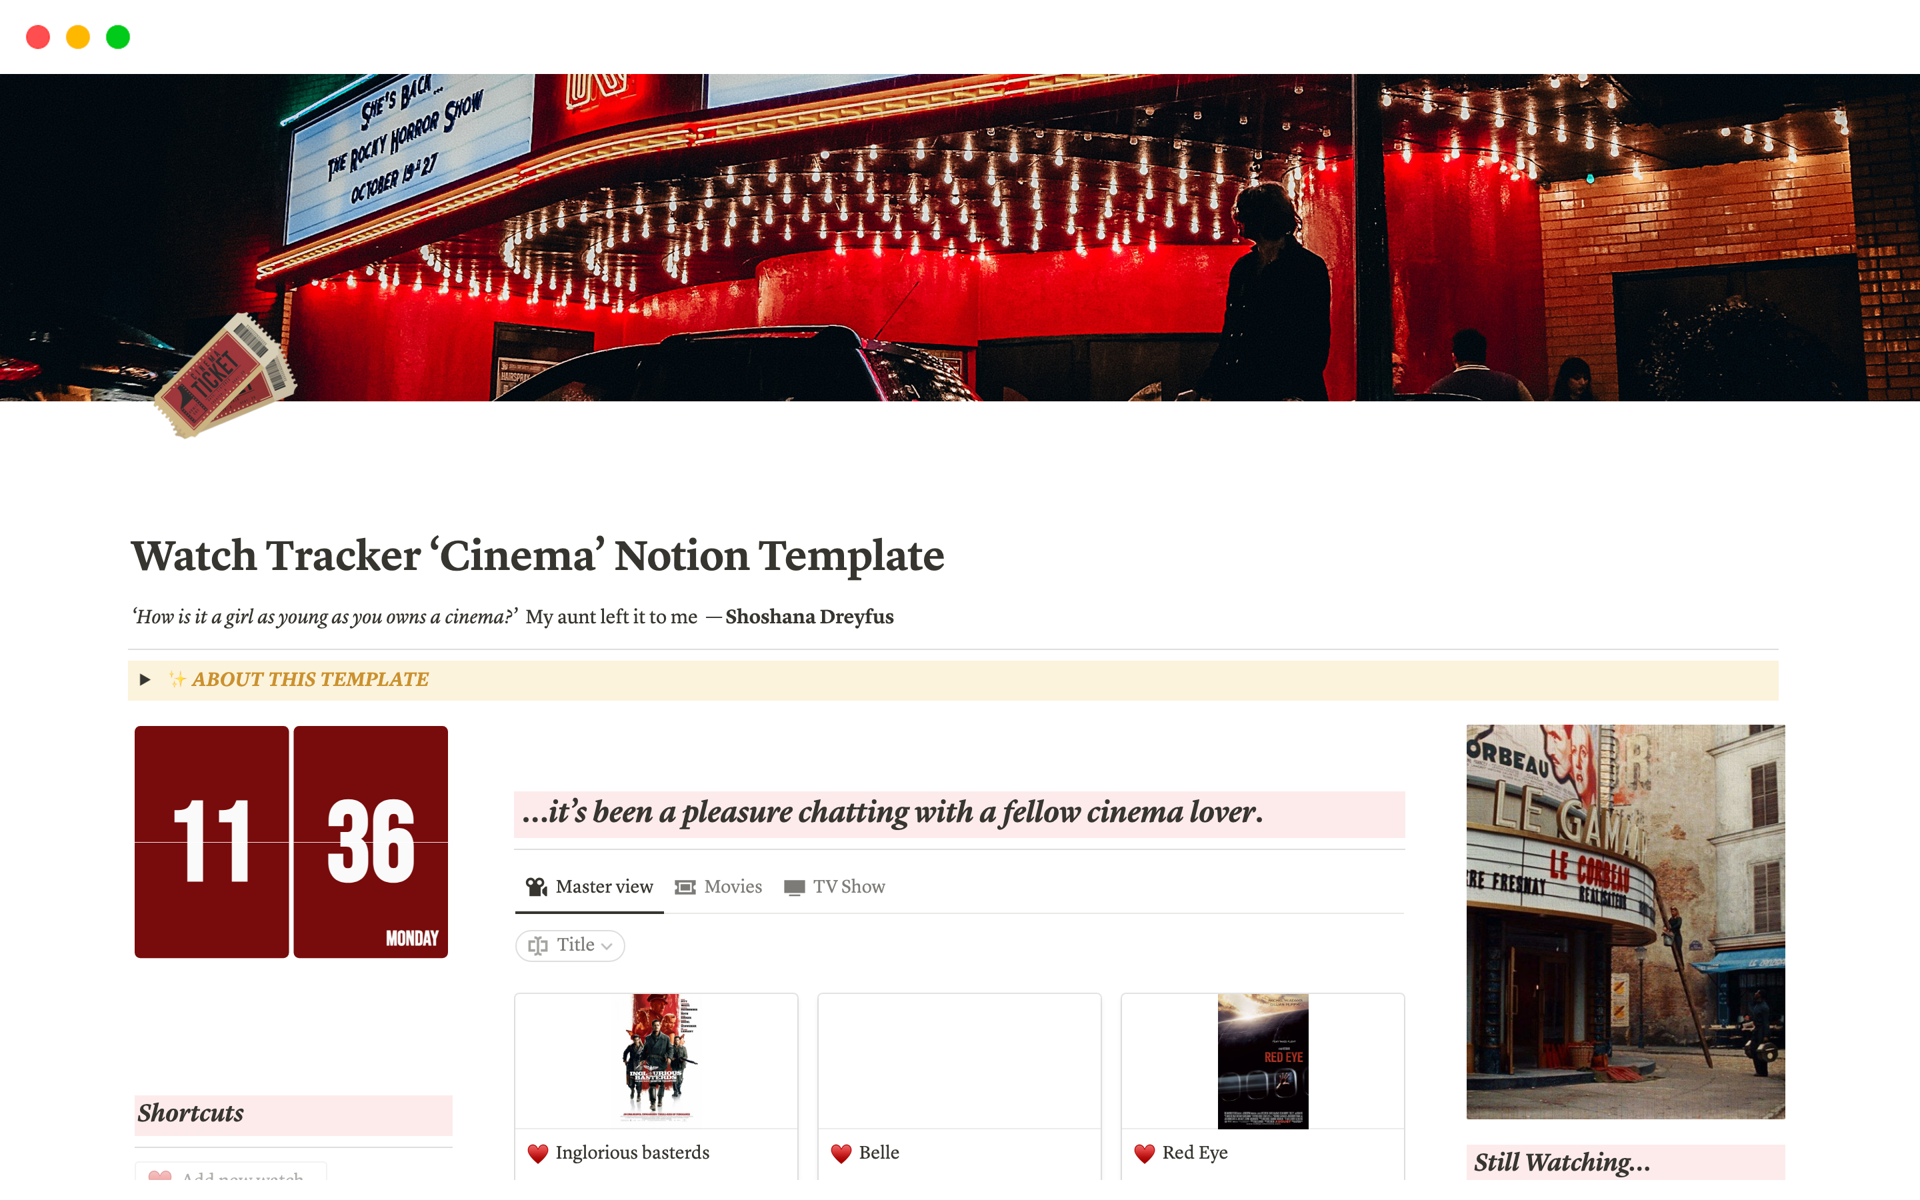 This template is a versatile tool designed to help you easily organize, track, and manage your movie and TV show-watching experience.